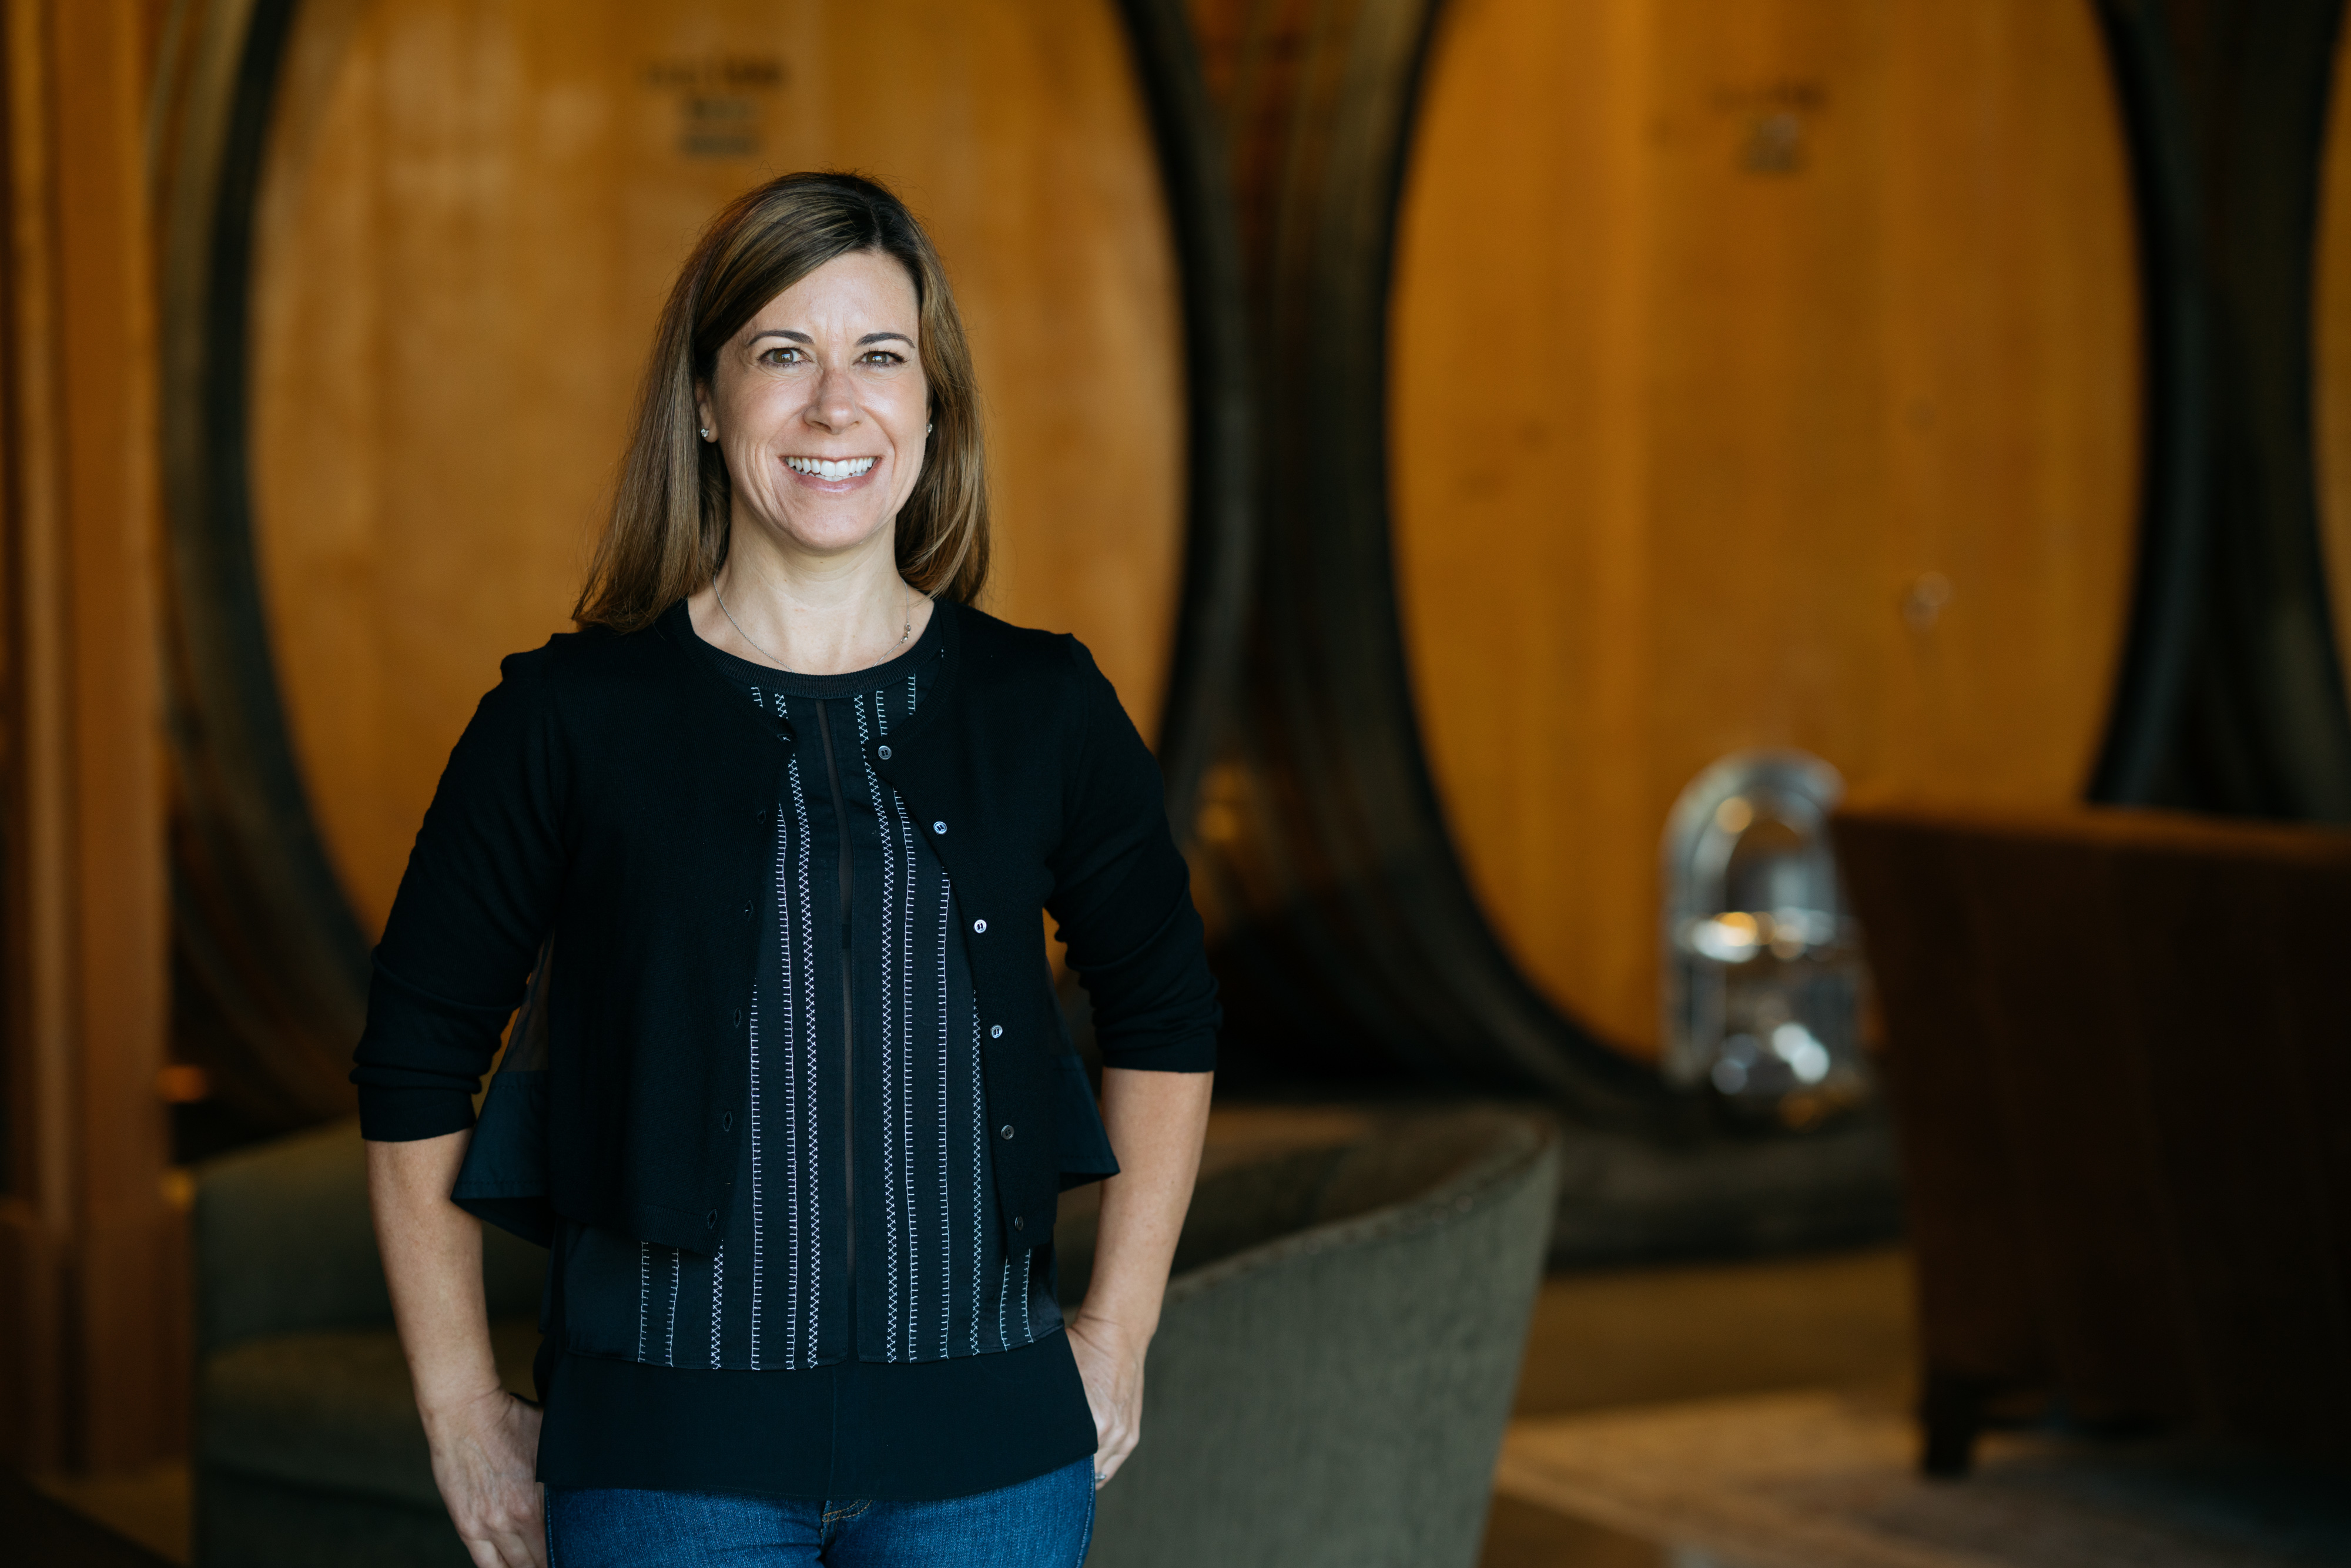 “The 2013 Insignia is one of the wines I am most proud of,” said Ashley Hepworth, Winemaker at Joseph Phelps Vineyards.